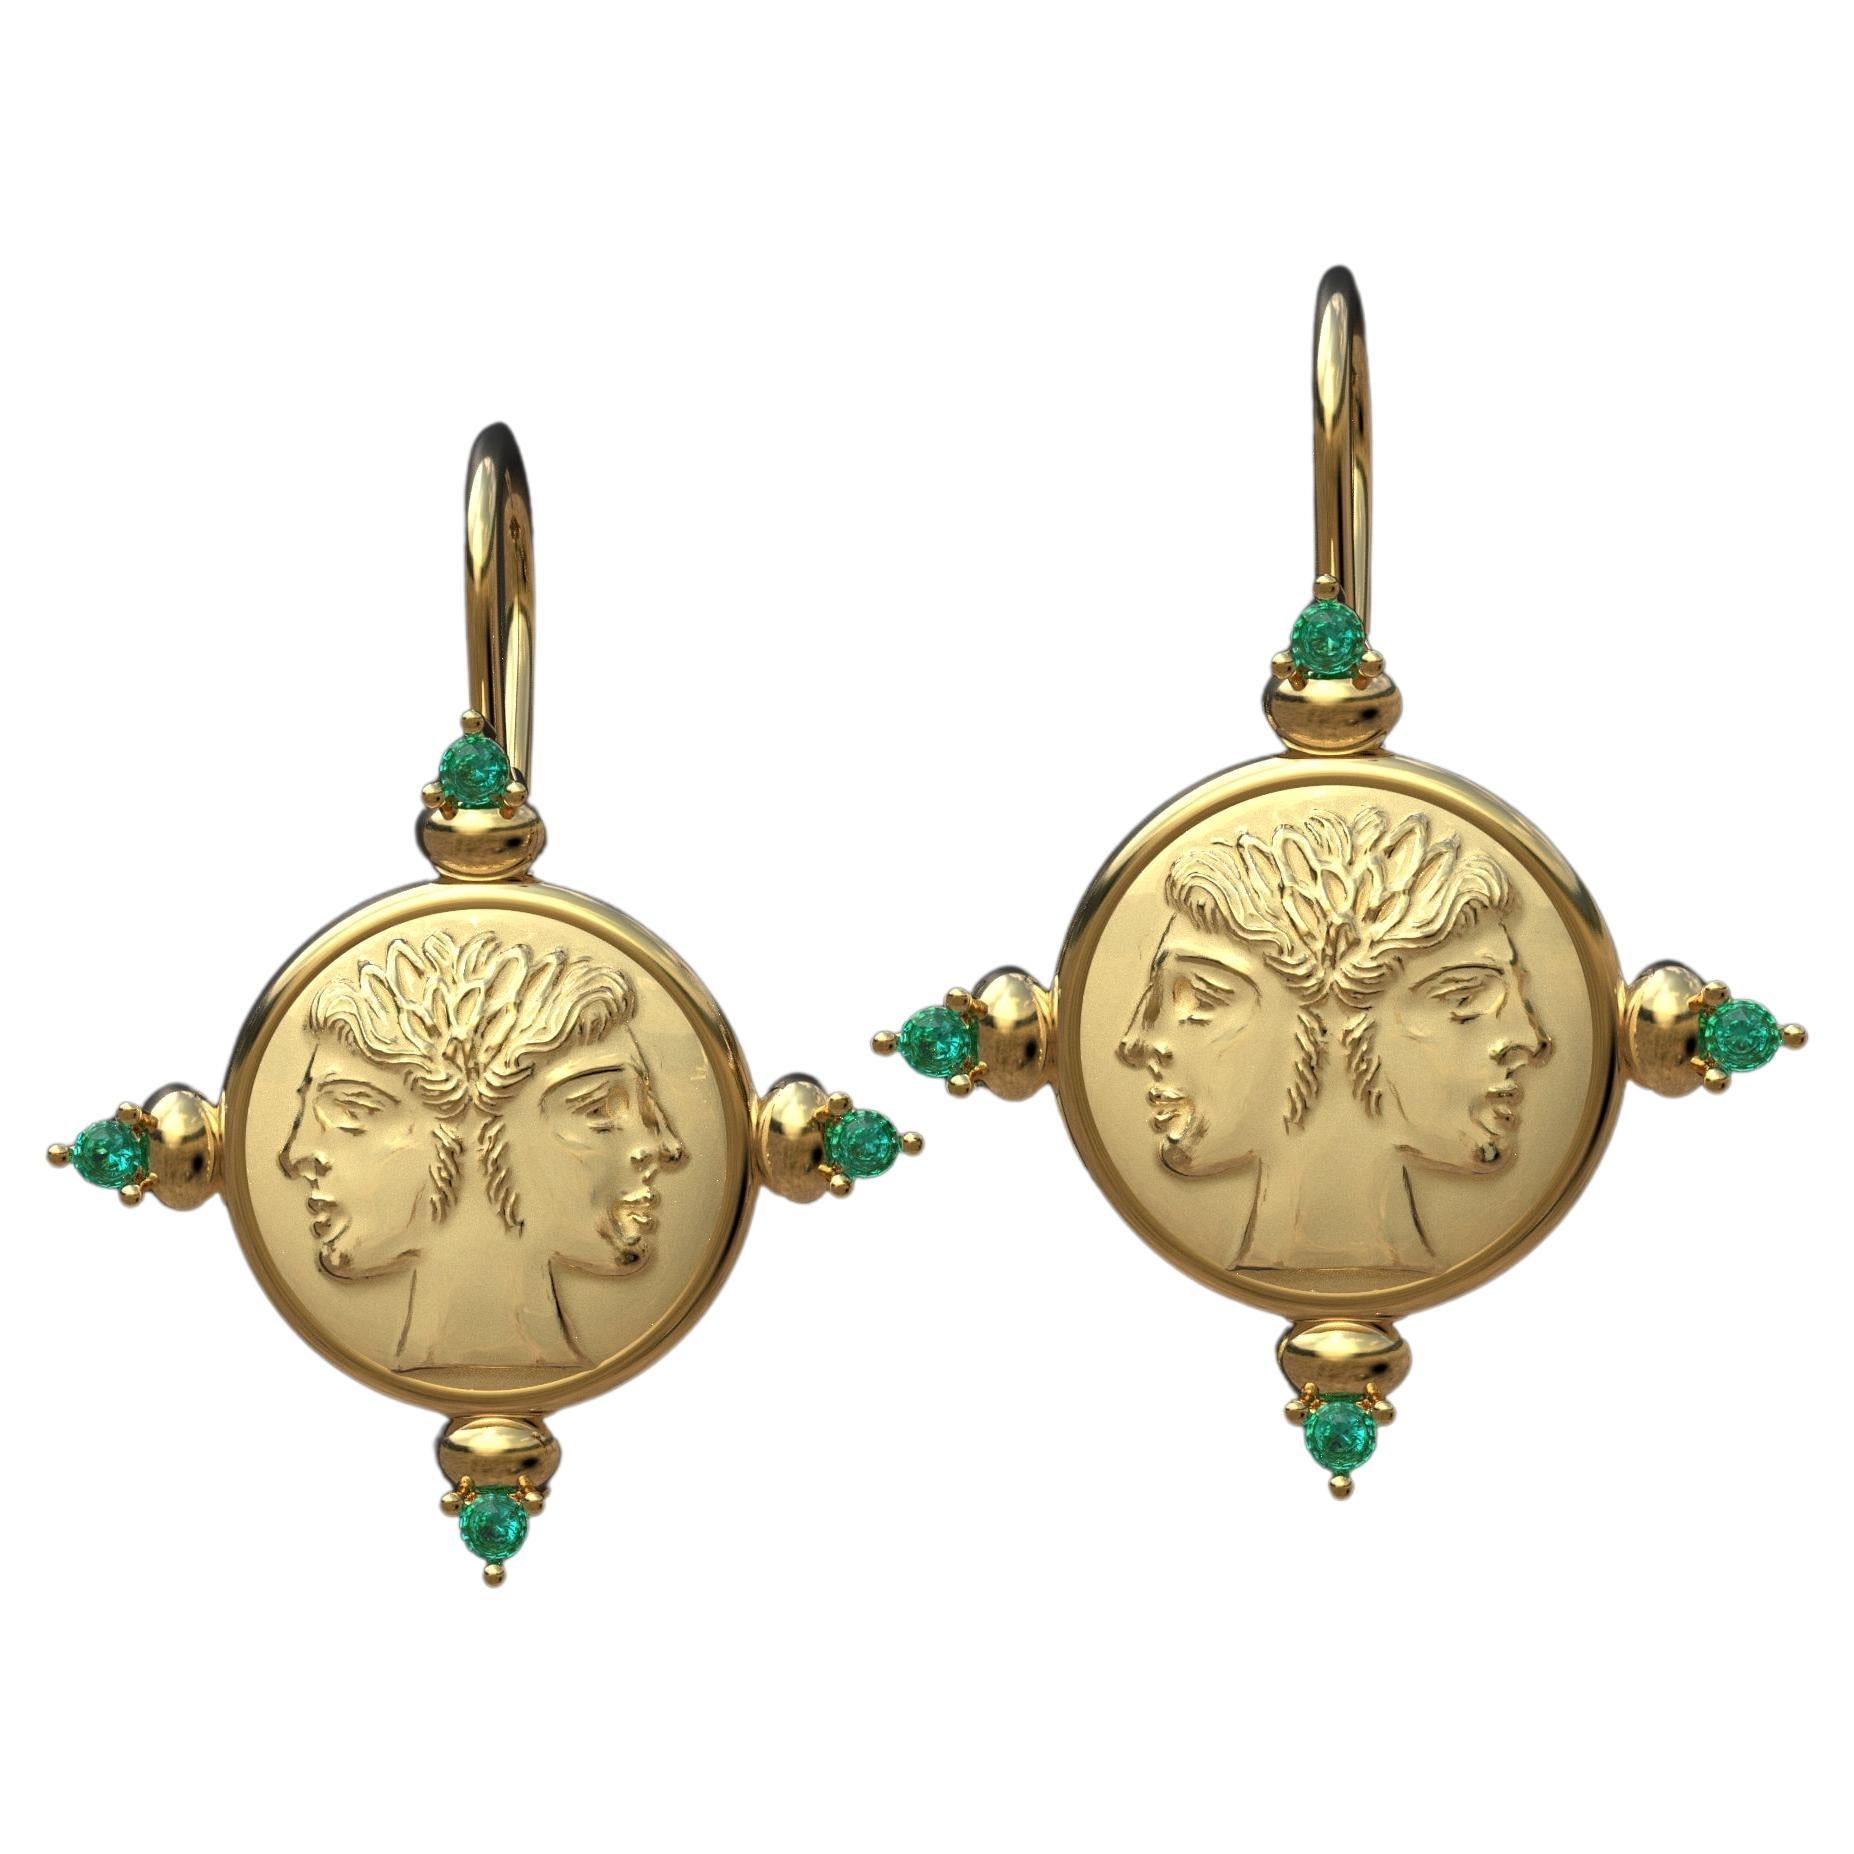 Italian 14k Gold Earrings in ancient Roman Style with Emeralds, made to order For Sale